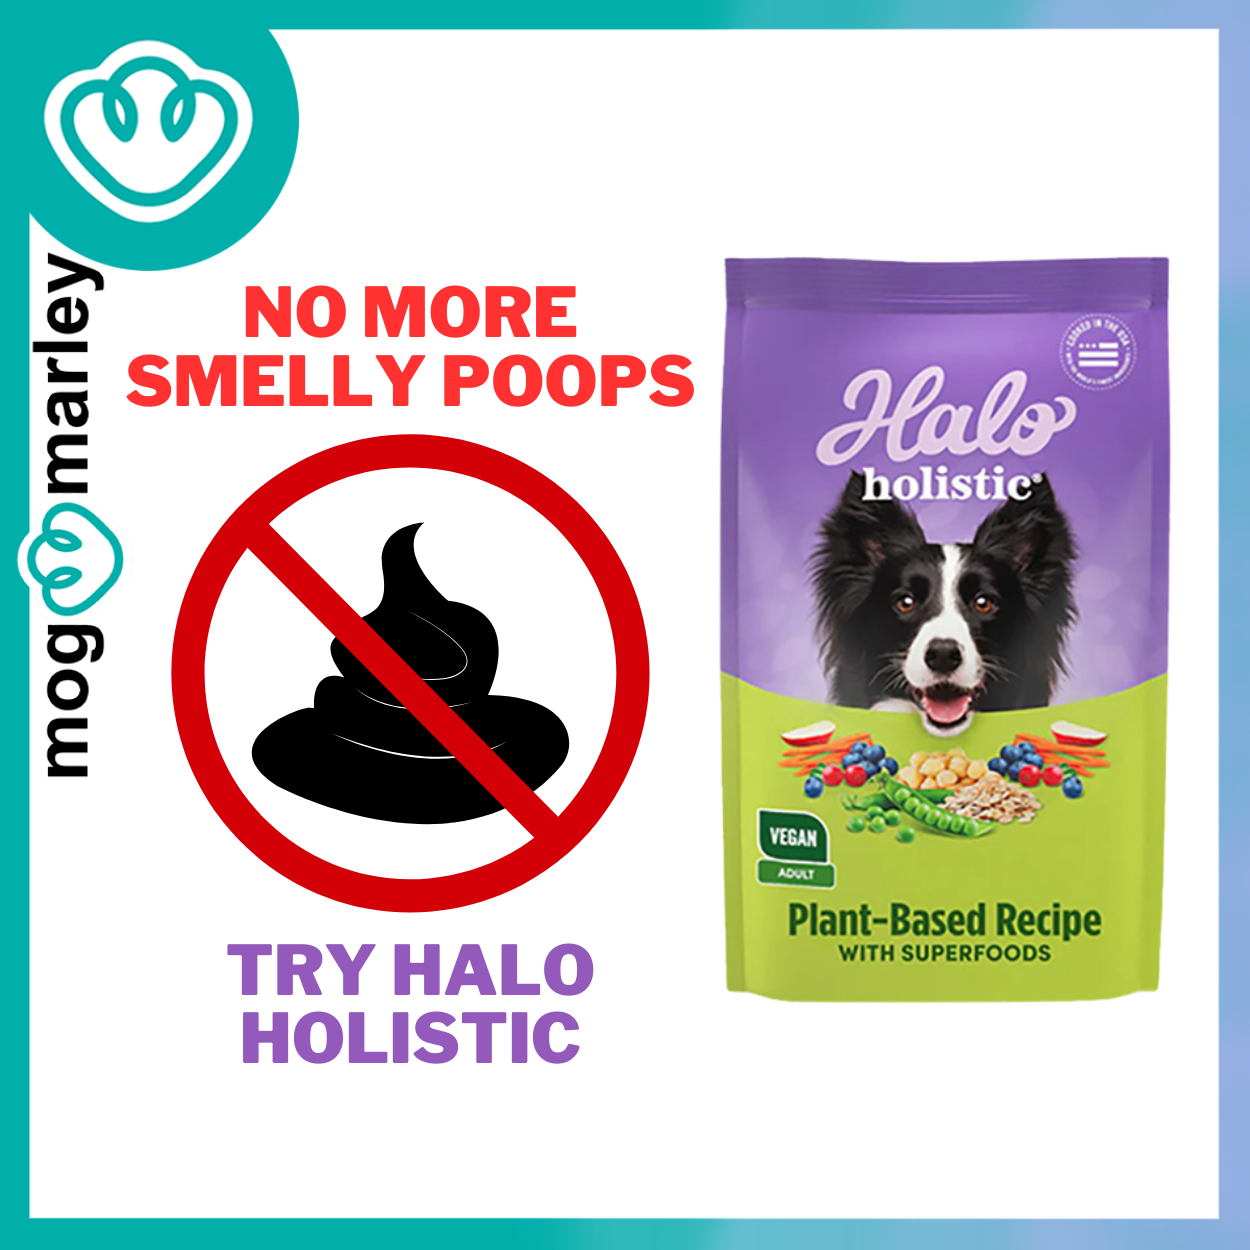 Halo Adult Dog Holistic Vegan Plant-Based Recipe with Superfoods Dry Food Buy 4+1 - mog and marley